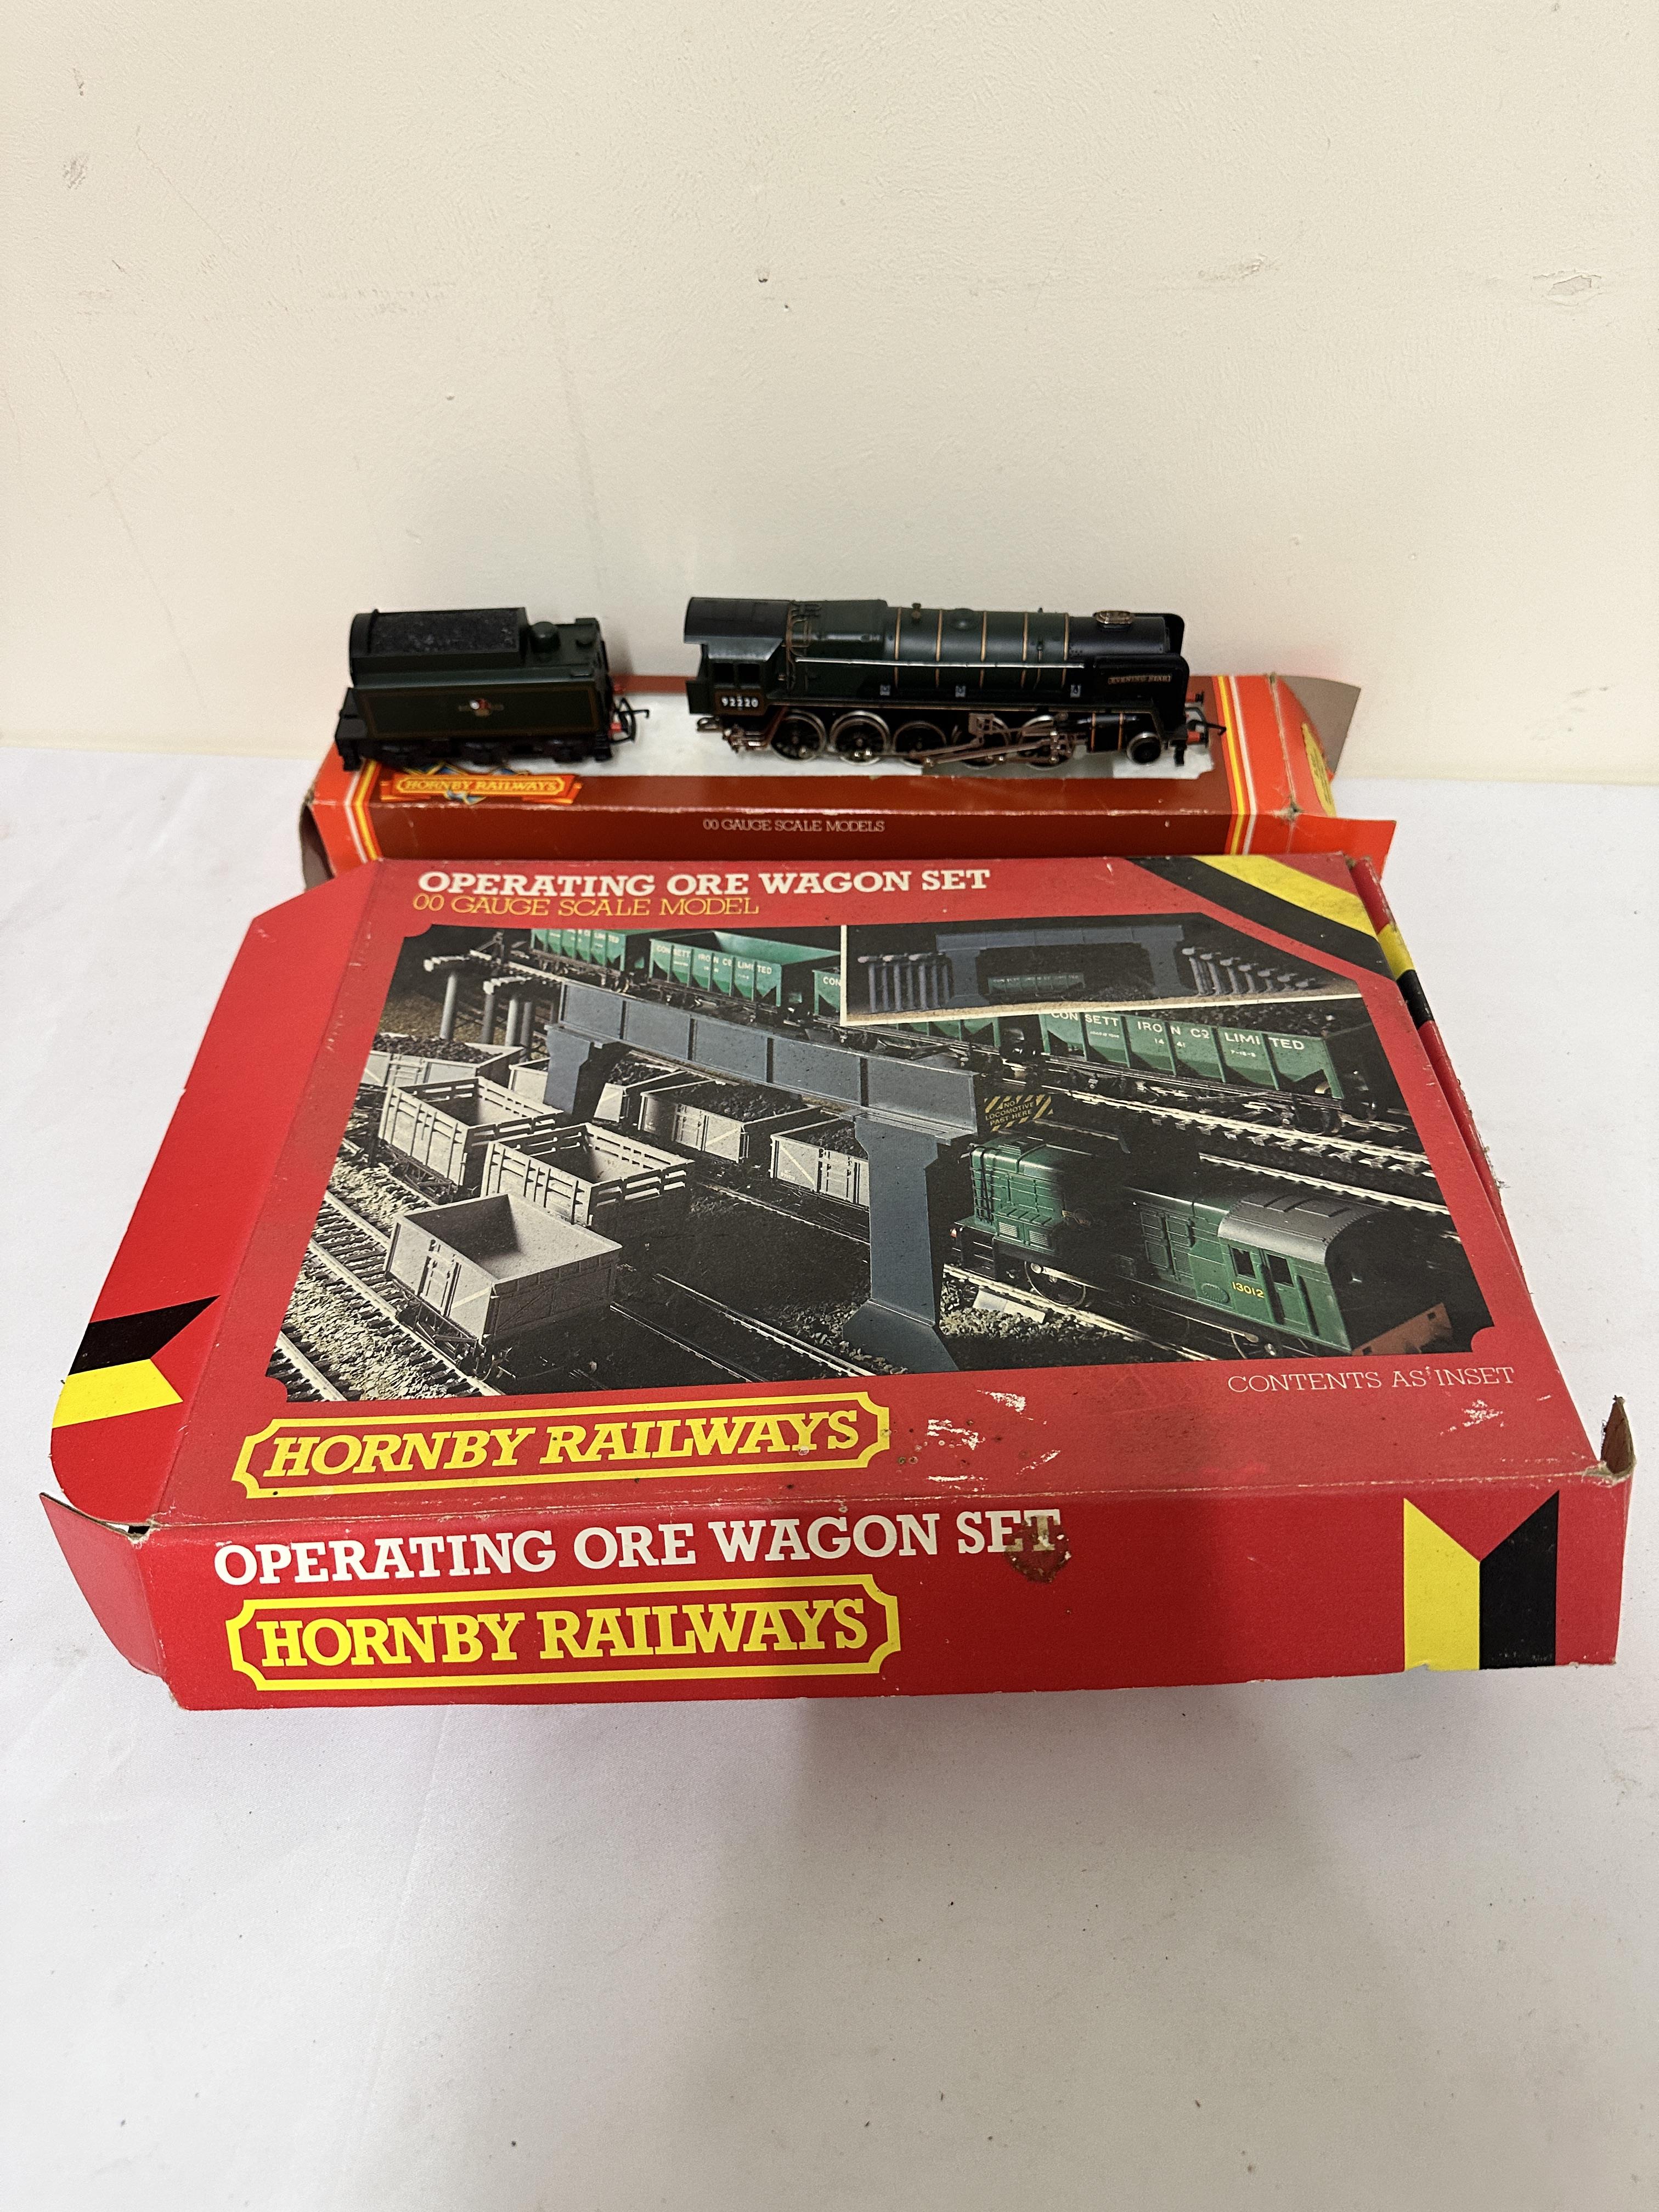 Hornby 00 gauge ore wagon, together with R303 locomotive]